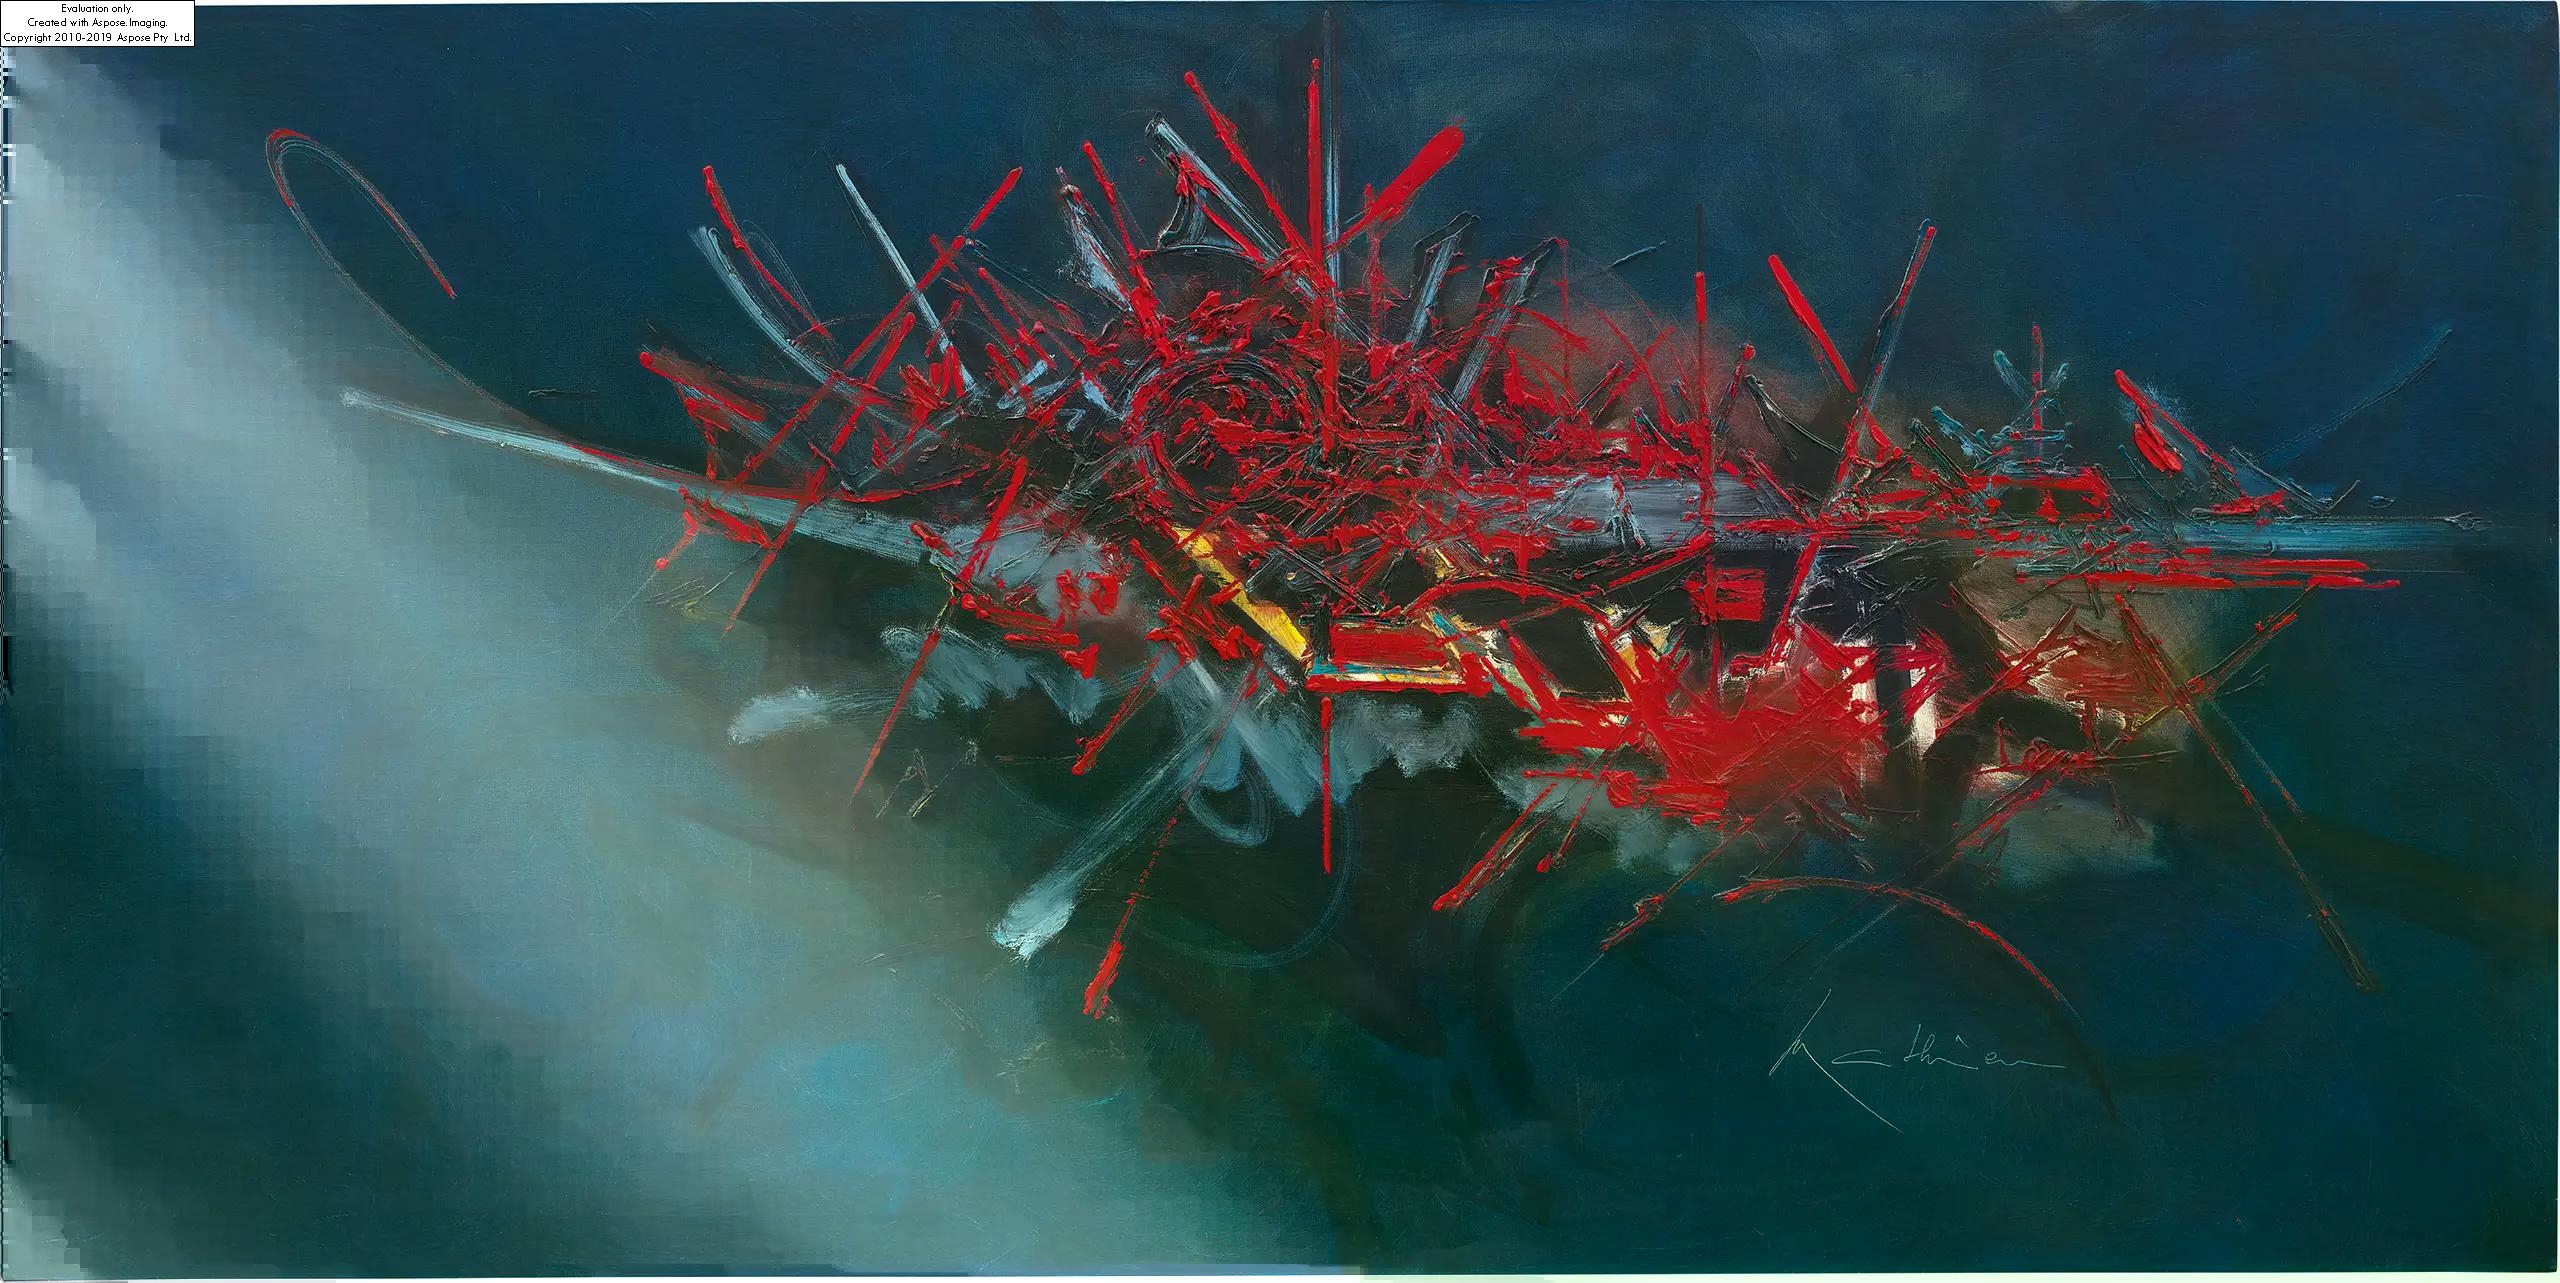 Saxifrage by Georges Mathieu, Painted in 1980